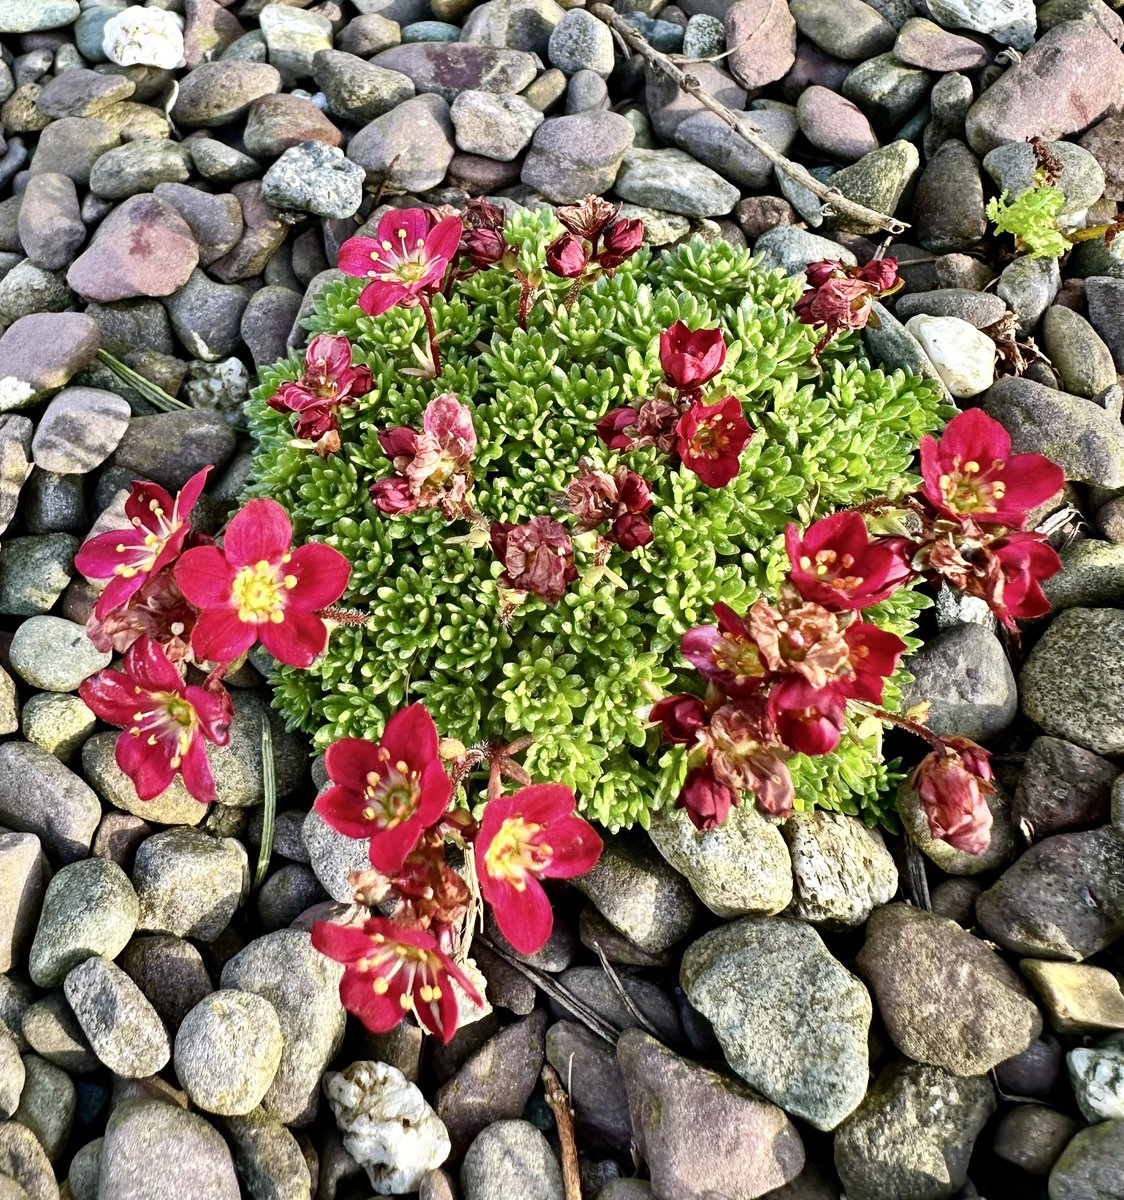 The advantages of not spraying the driveway. Irish Saxifrage (I think ). Whatever it is it’s stunning.